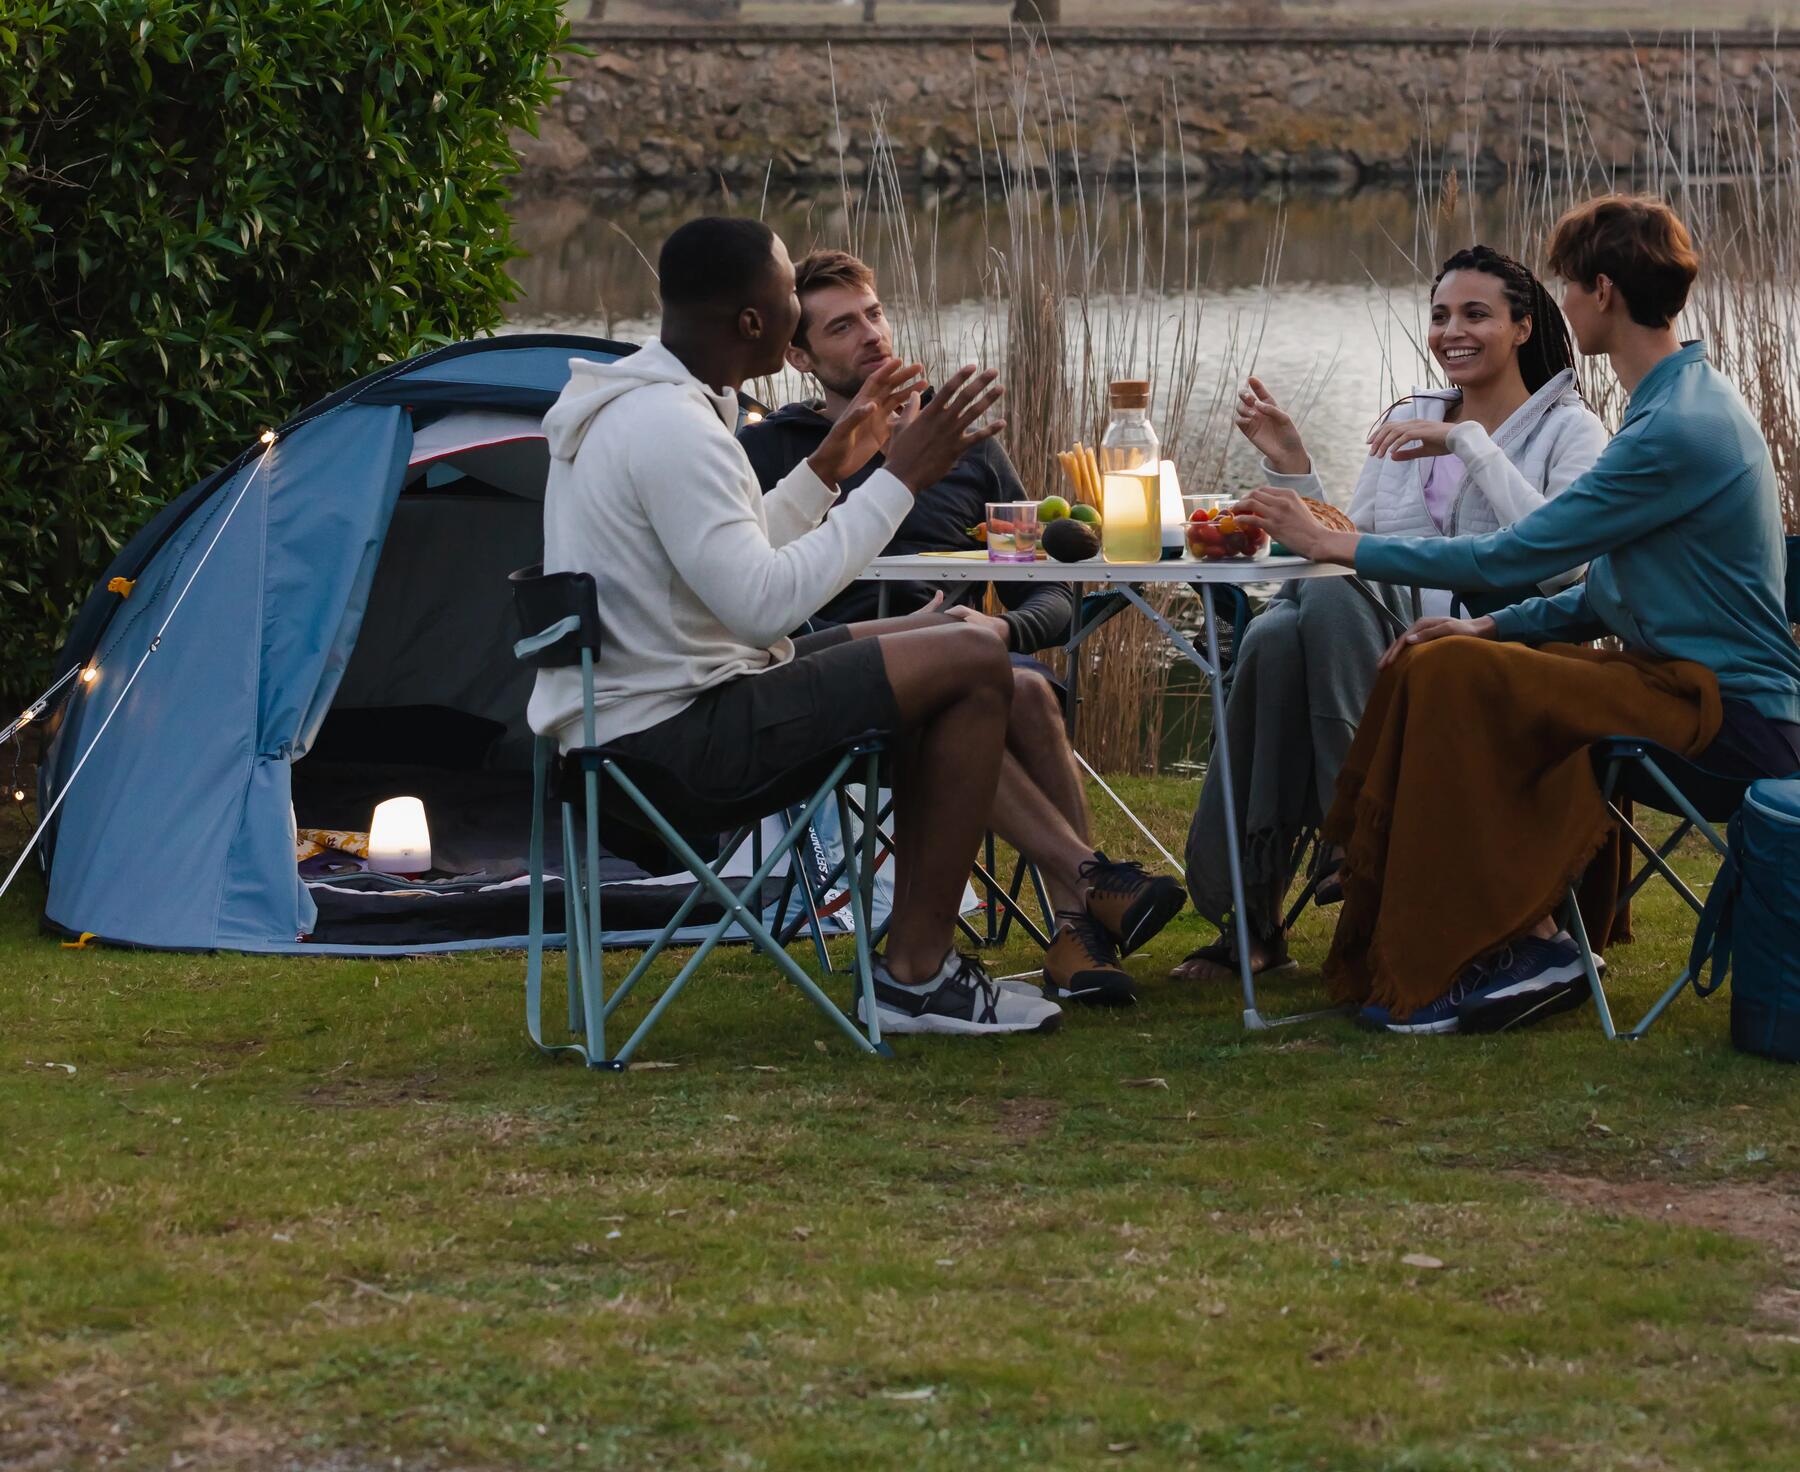  A group of people gathered around a camping table 